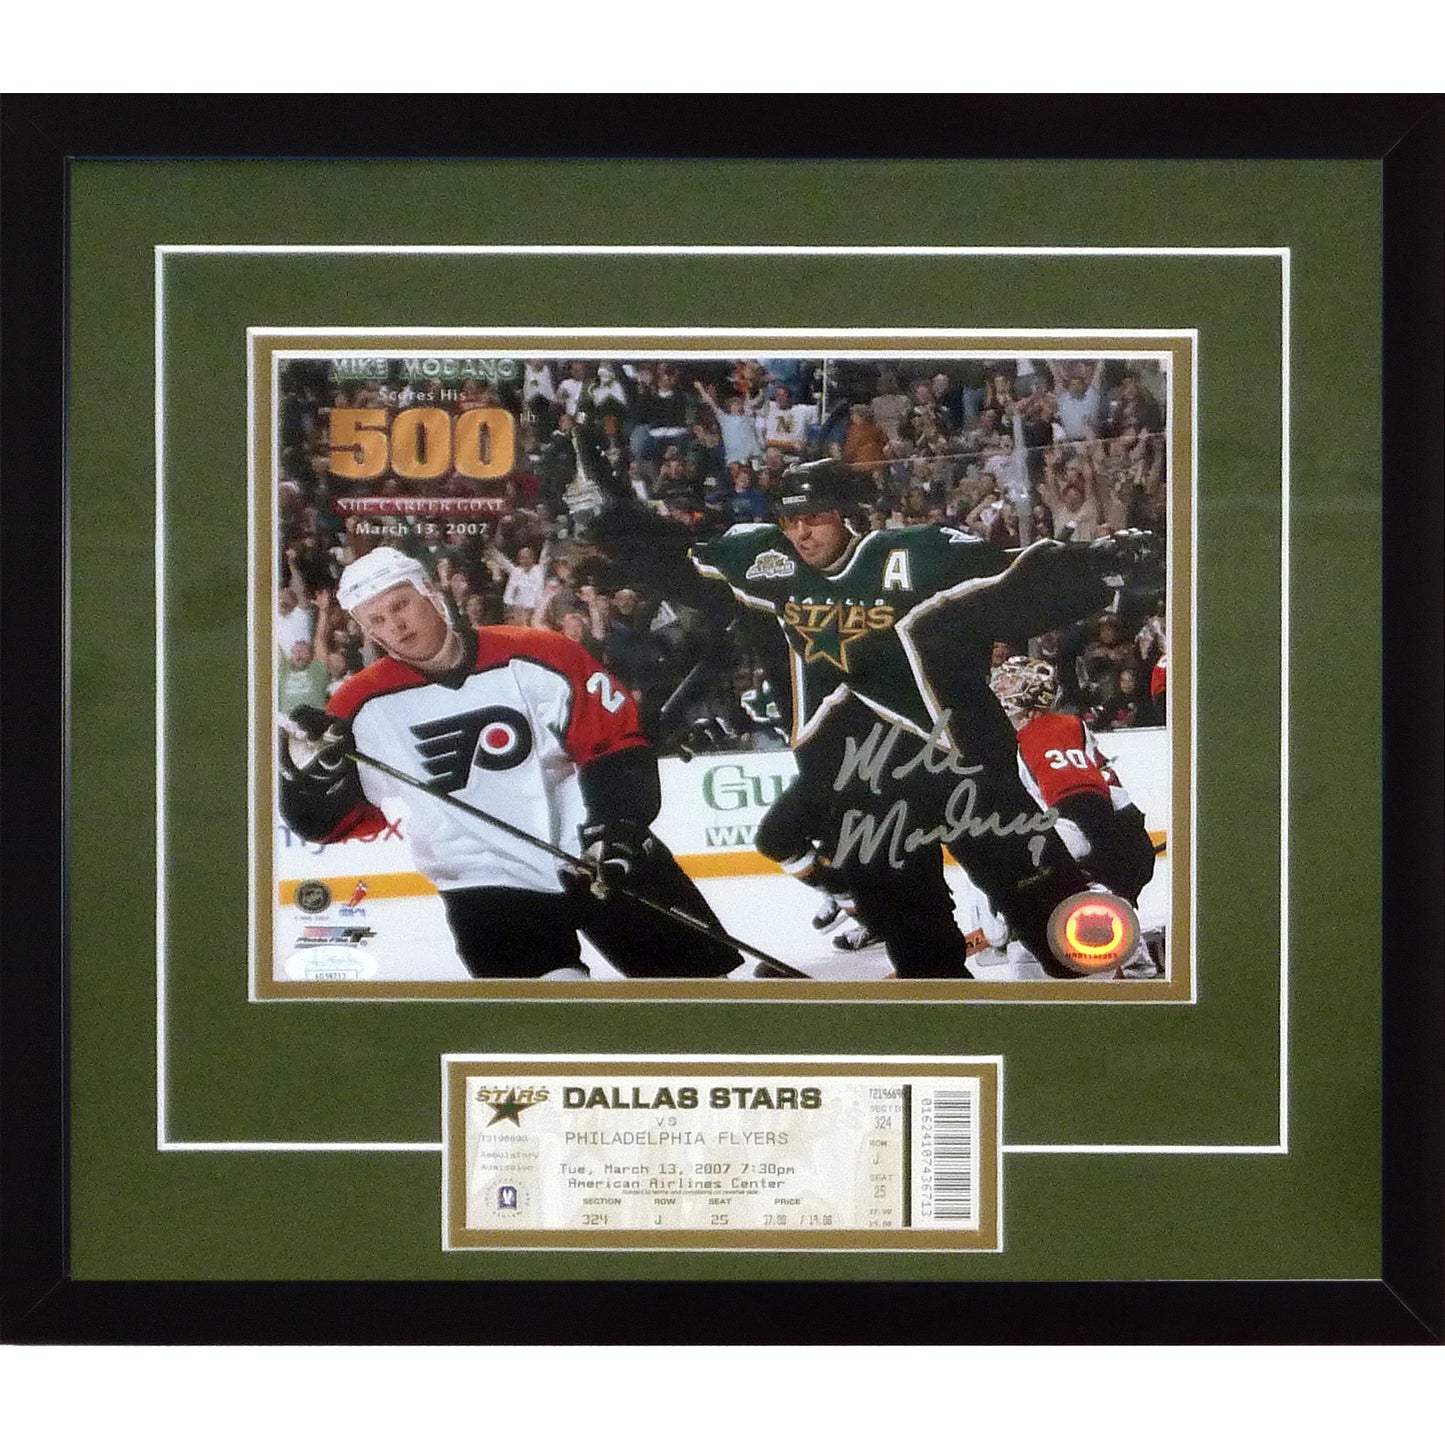 Mike Modano Autographed Dallas Stars (500th Goal) 8x10 Photo Deluxe Framed with Original Game Ticket – JSA